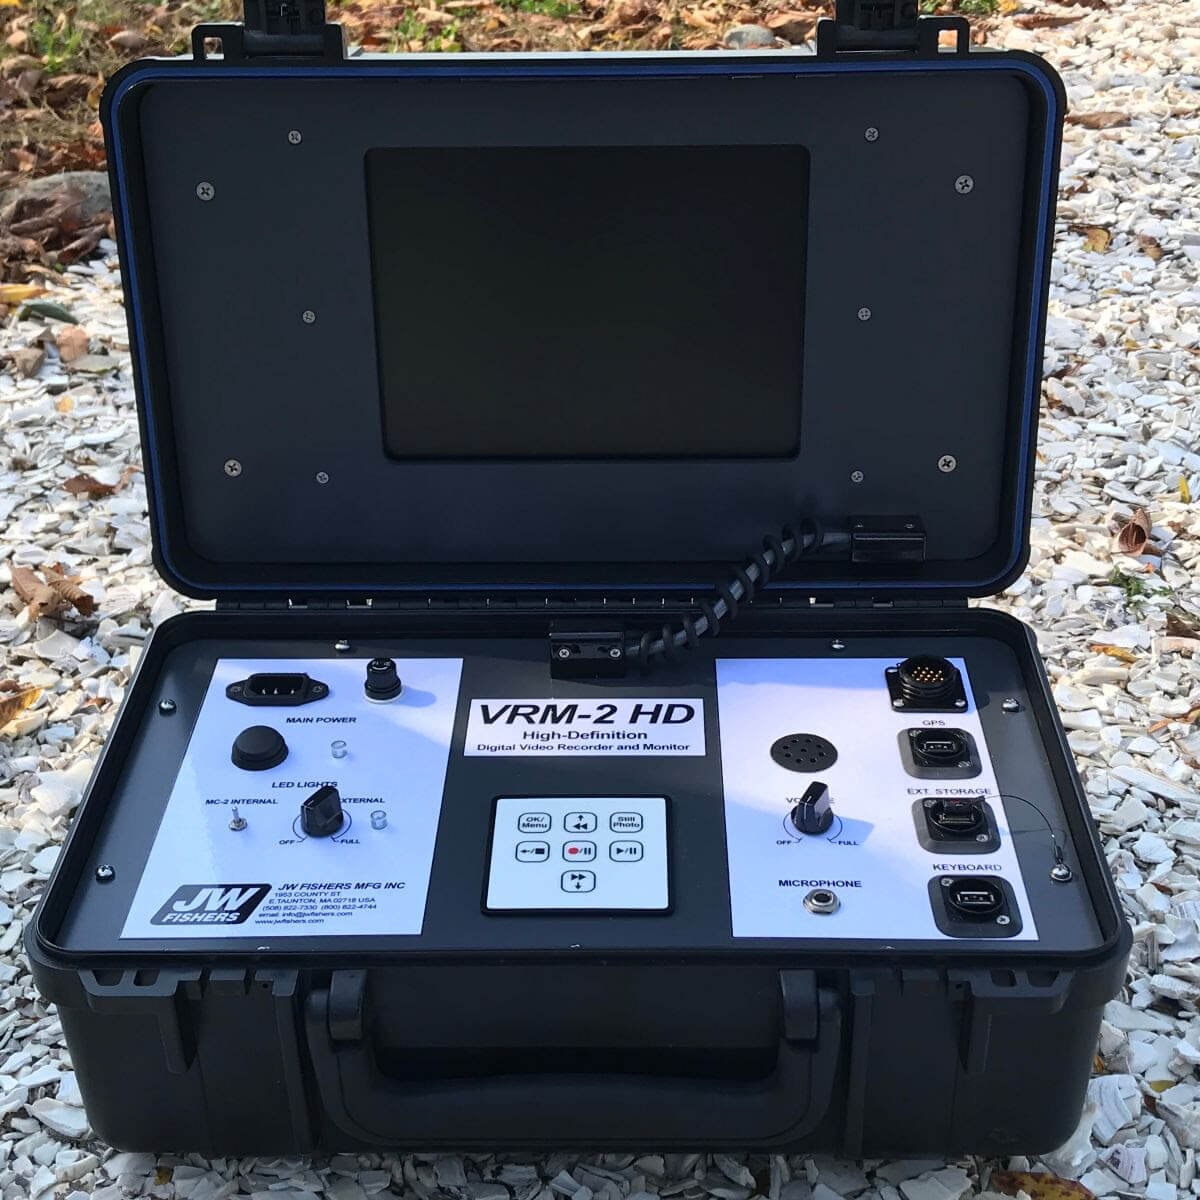 The VRM-2 HD Video Recording Monitor